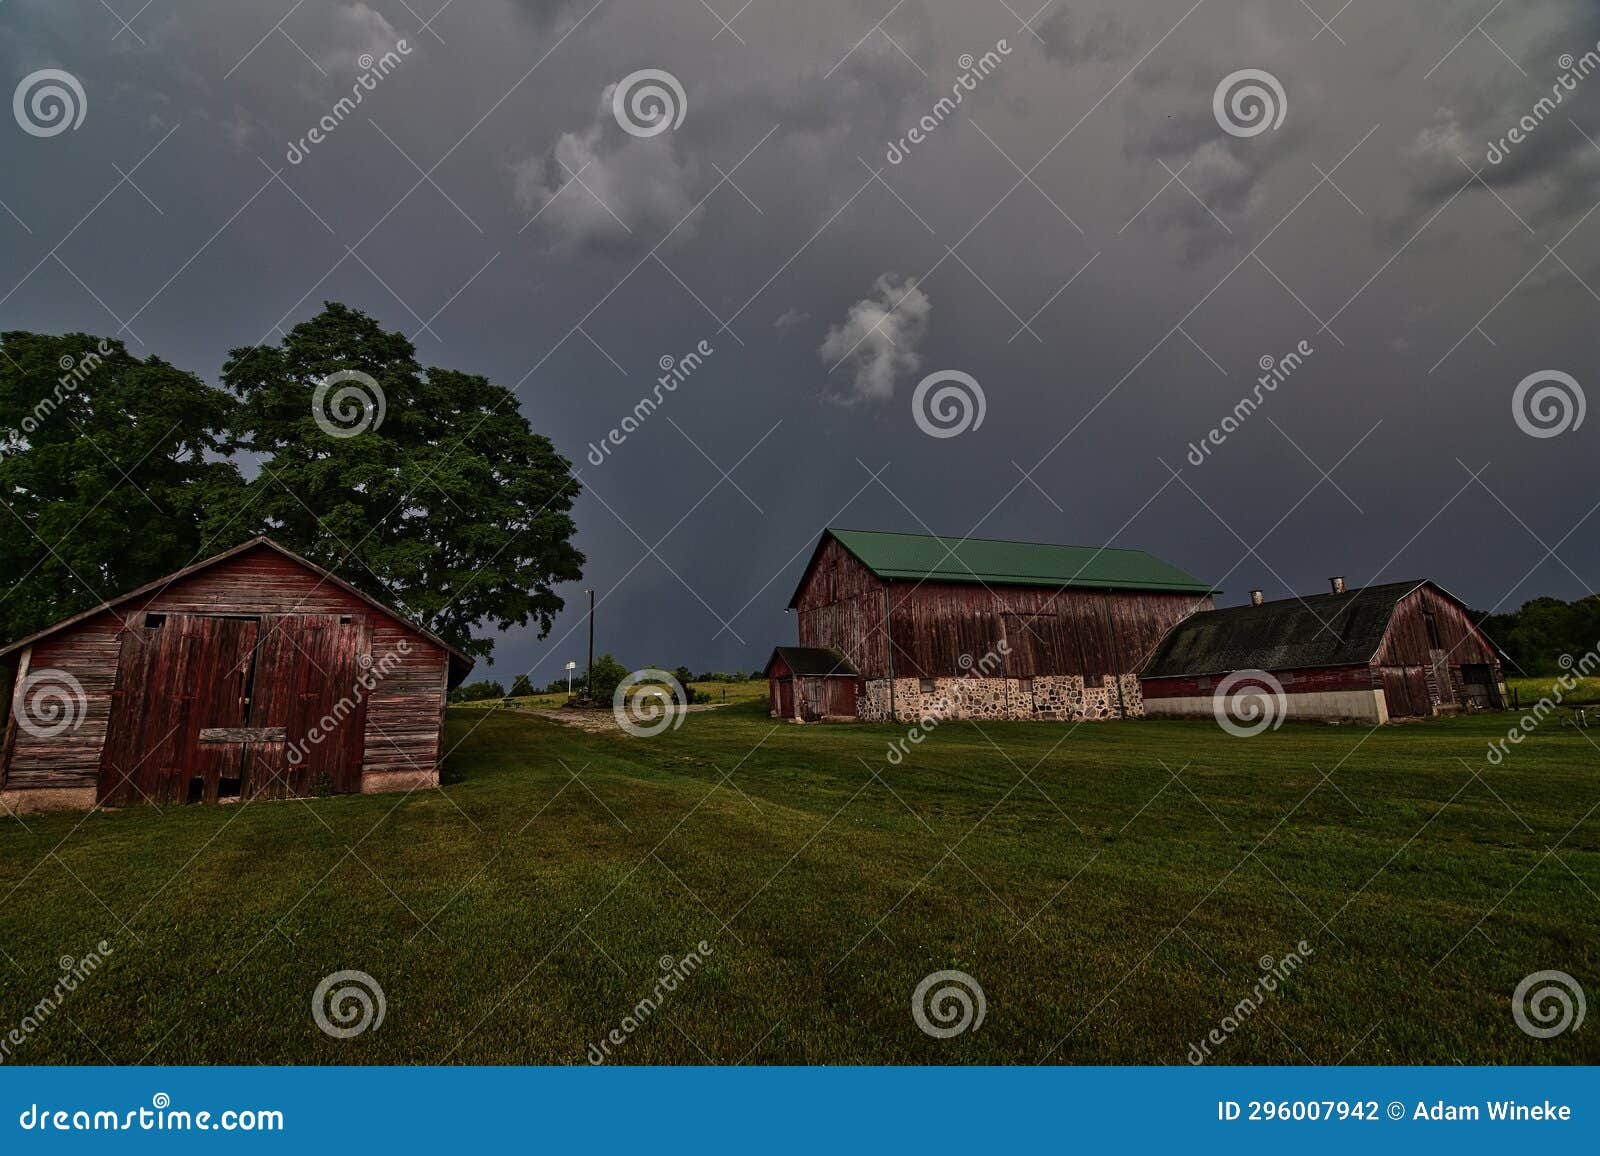 farm buildings silo and barn at dorothy carnes state natural area in wi